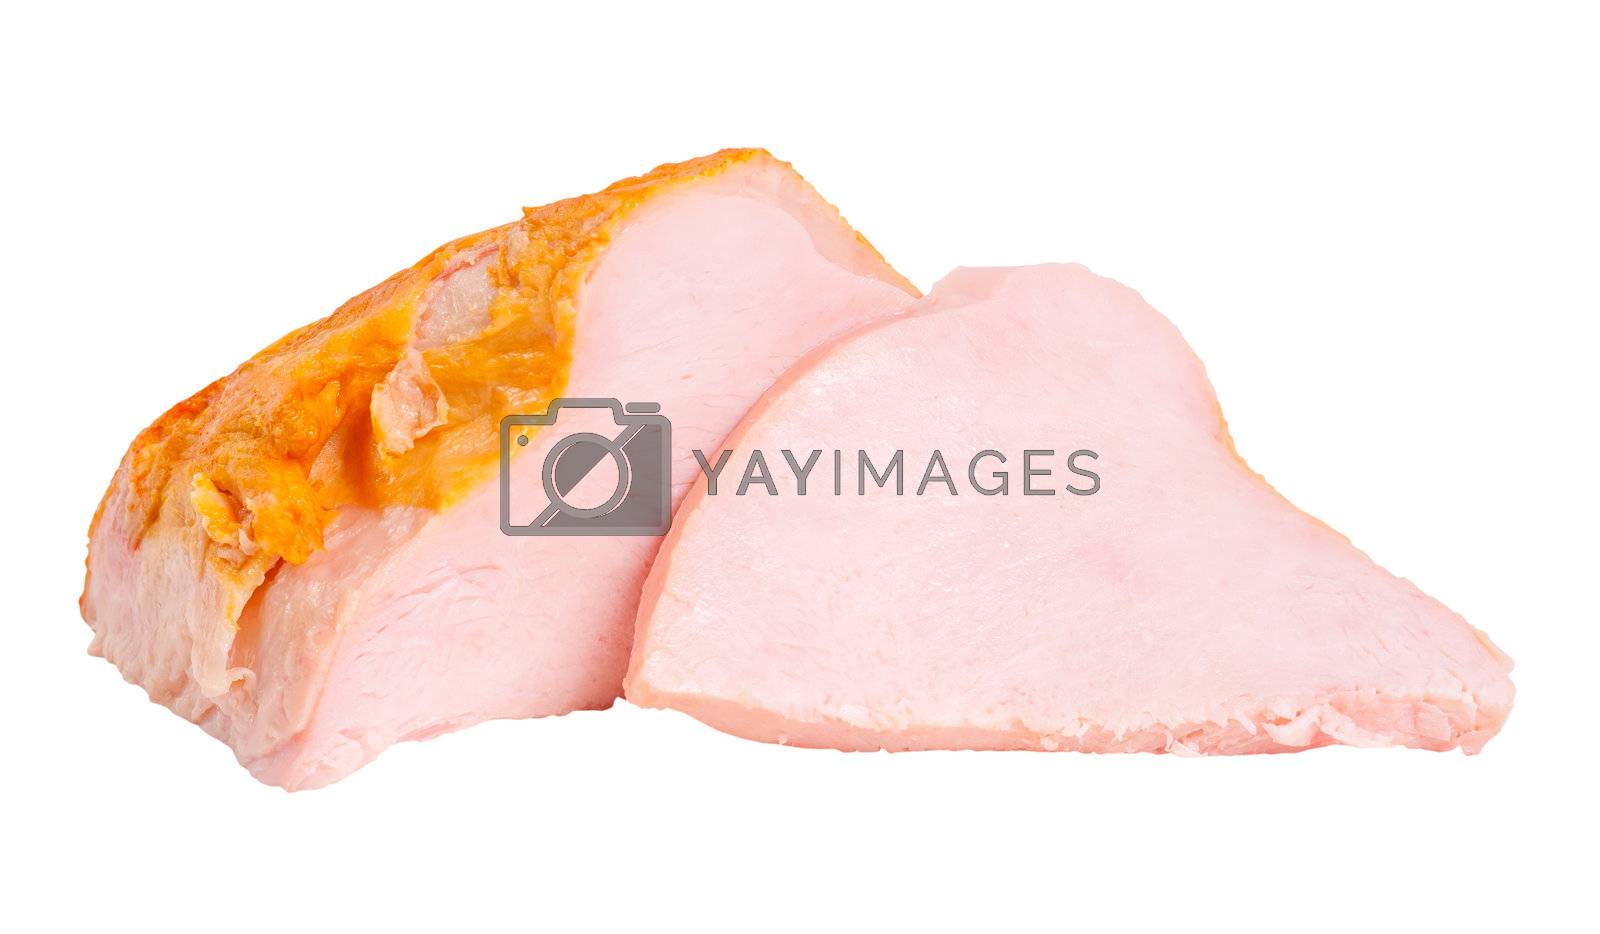 Royalty free image of Whole pieces and sliced turkey breast fillet by firewings